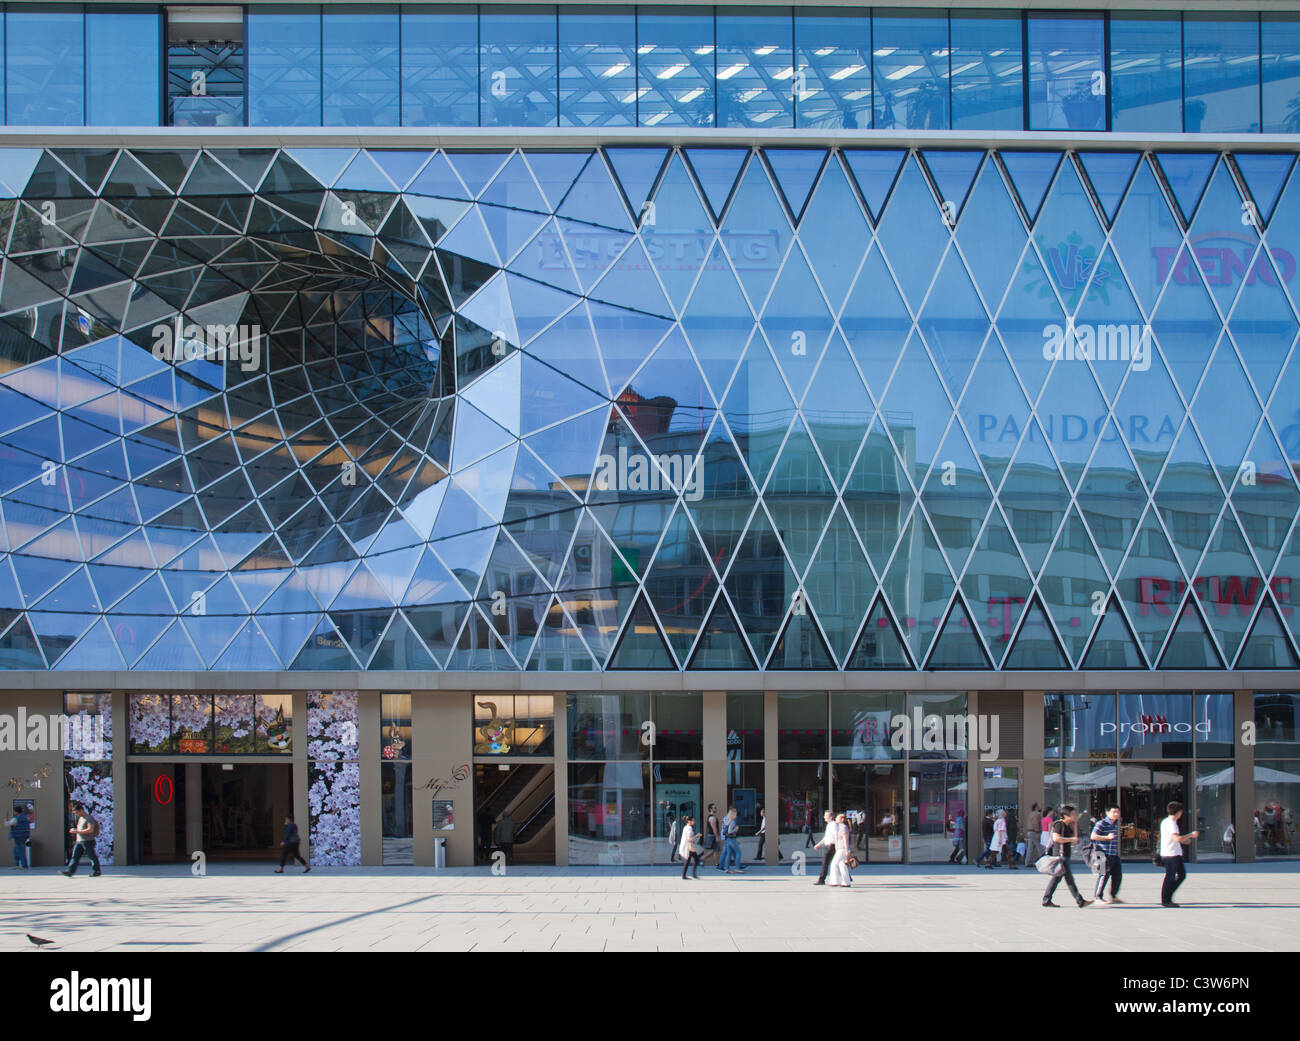 The MyZeil Facade in central Frankfurt, a new, modern shopping mall on the main shopping street known as the Zeil. Stock Photo